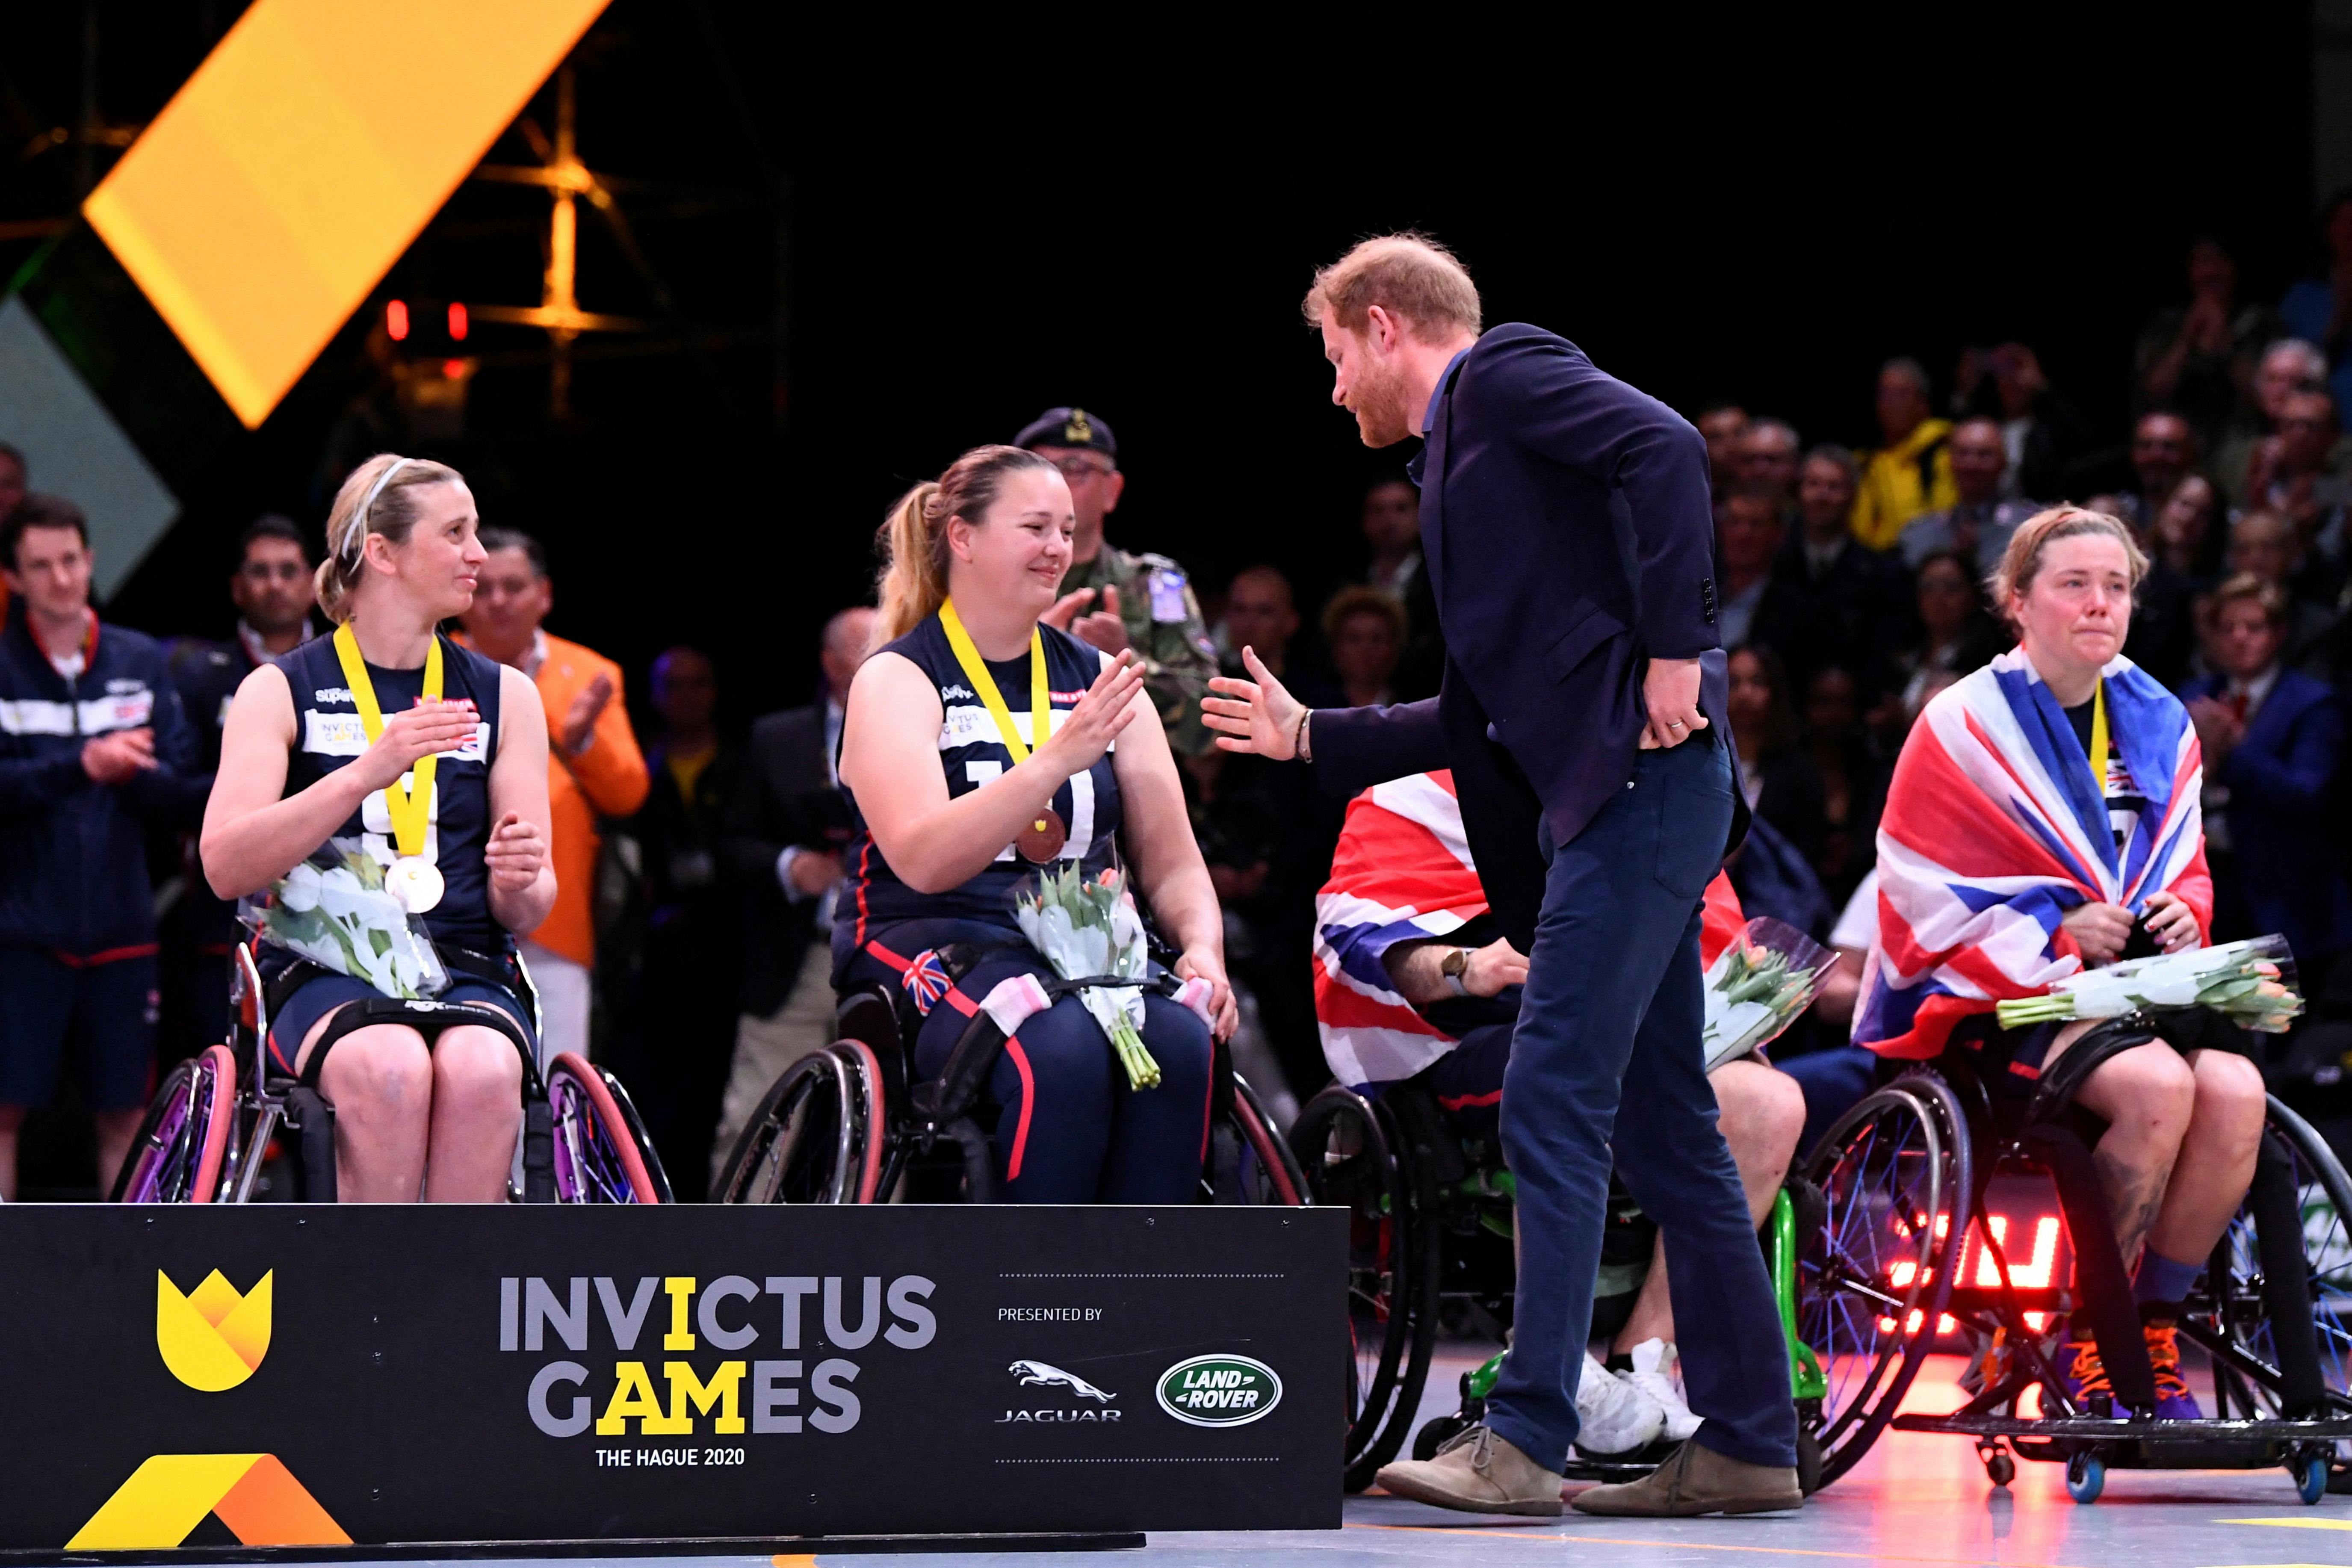 Britain's Prince Harry shakes hands with a British team member after the wheelchair basketball final of the Invictus Games in The Hague, Netherlands April 22, 2022. REUTERS/Piroschka Van De Wouw